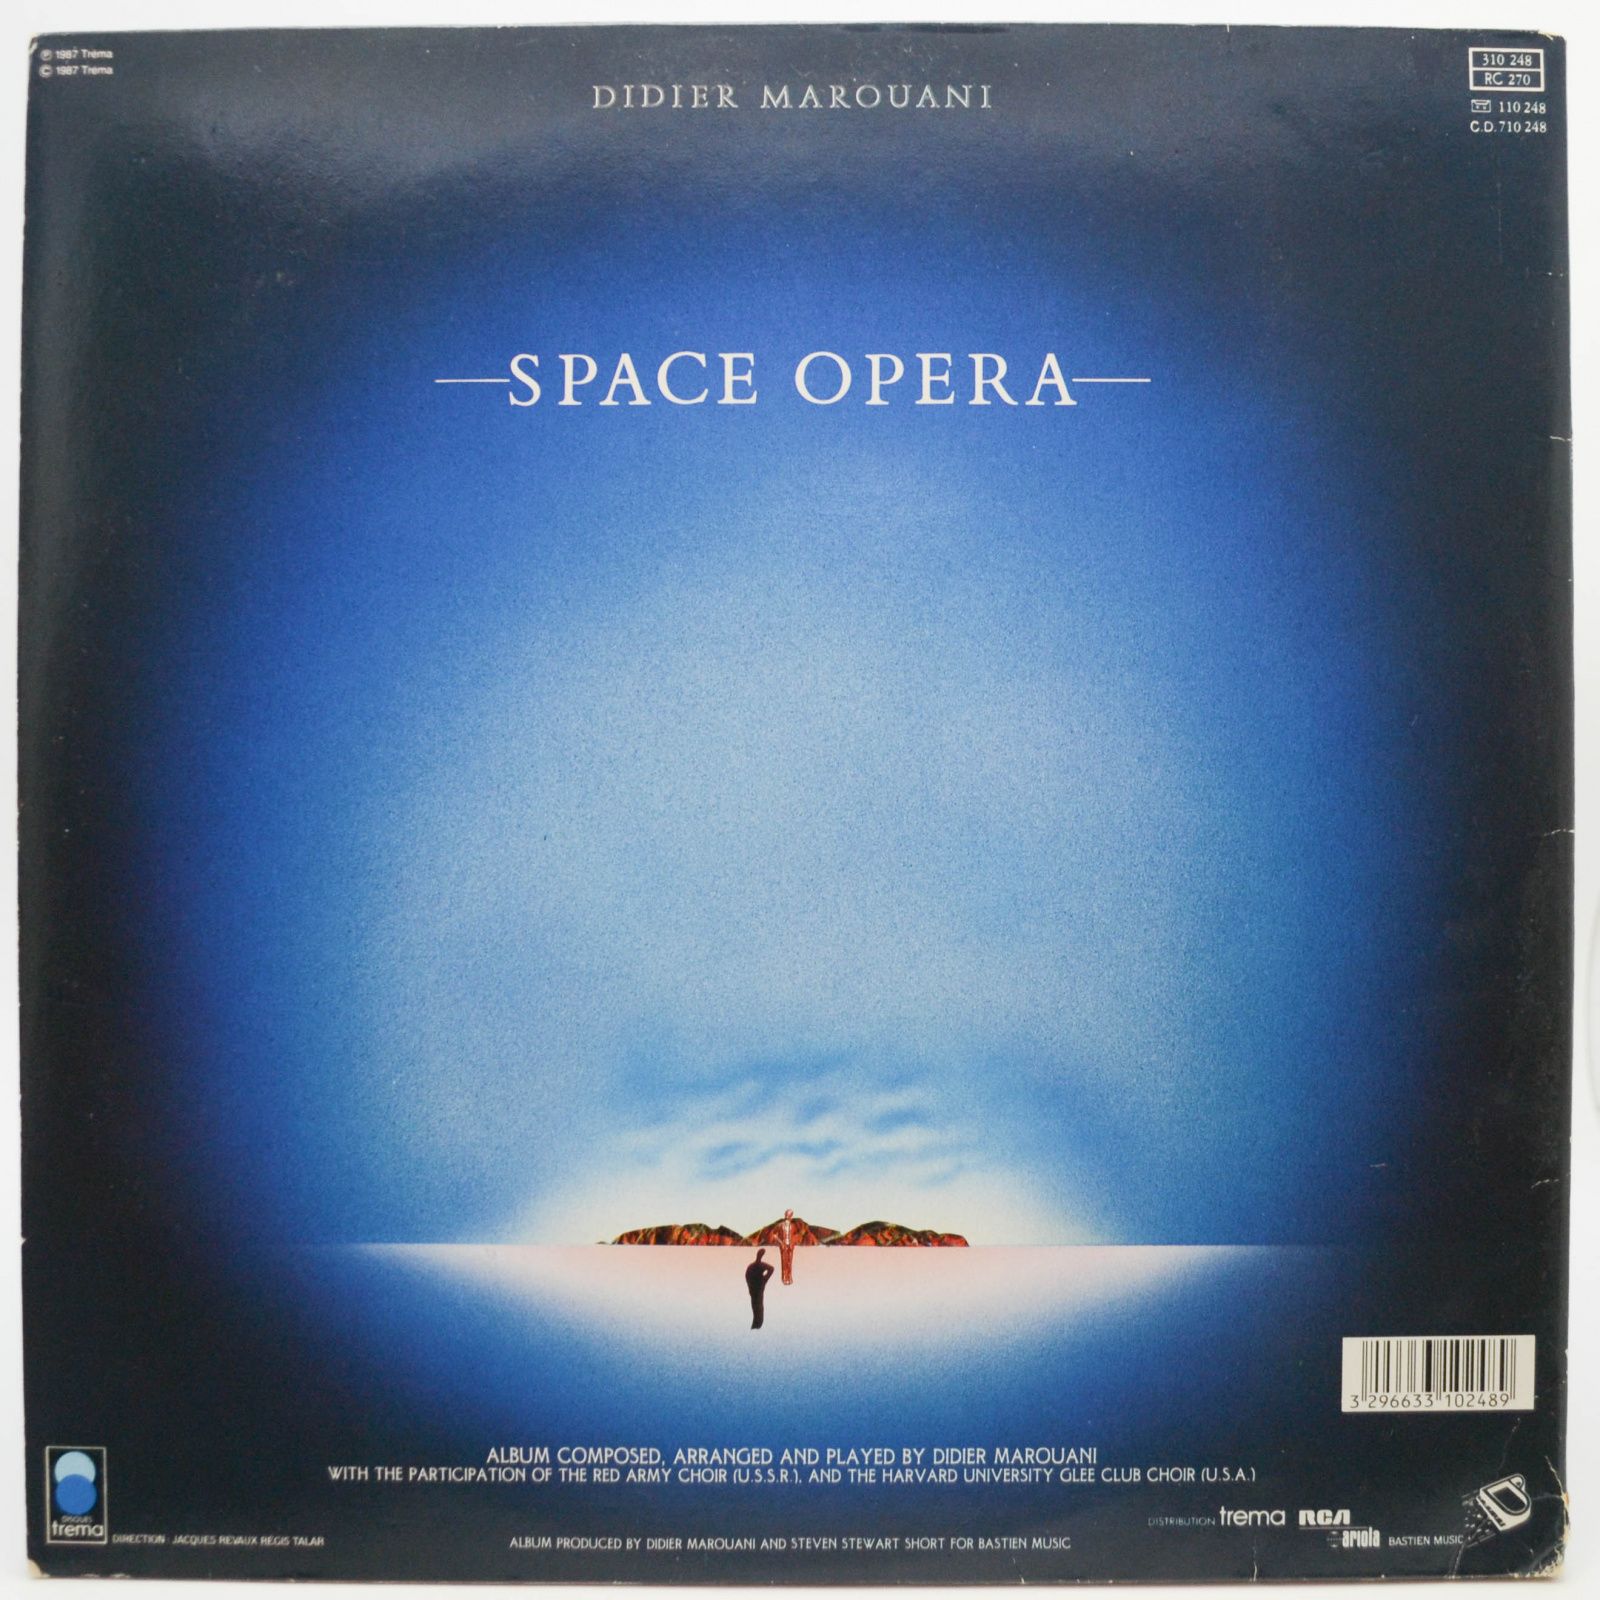 Didier Marouani — Space Opera (1-st, France), 1987